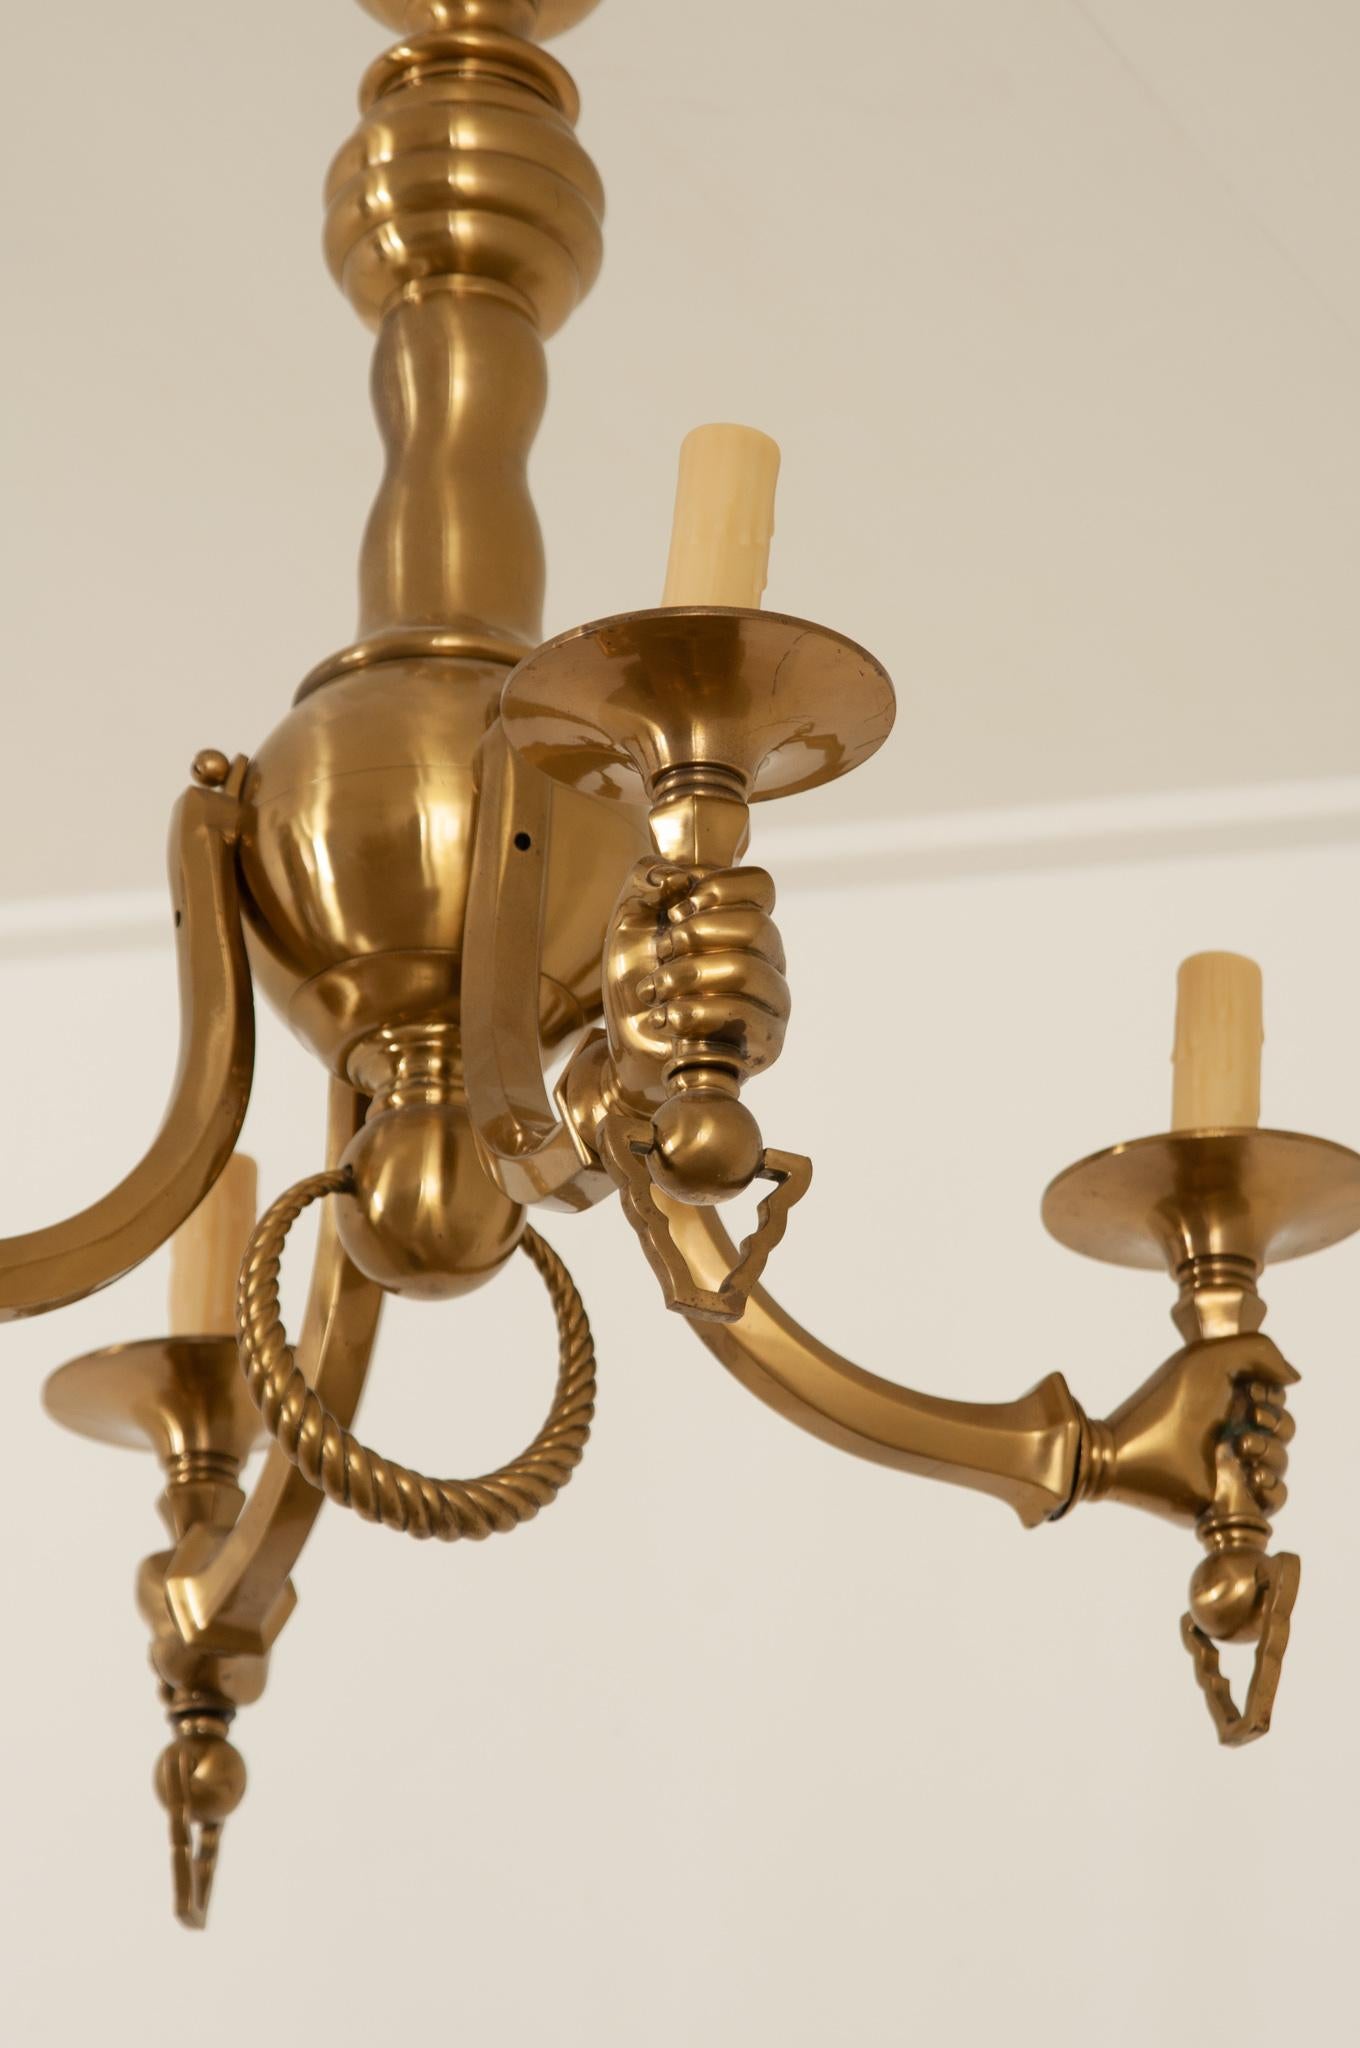 Italian Vintage Solid Brass Hand Chandelier In Good Condition For Sale In Baton Rouge, LA